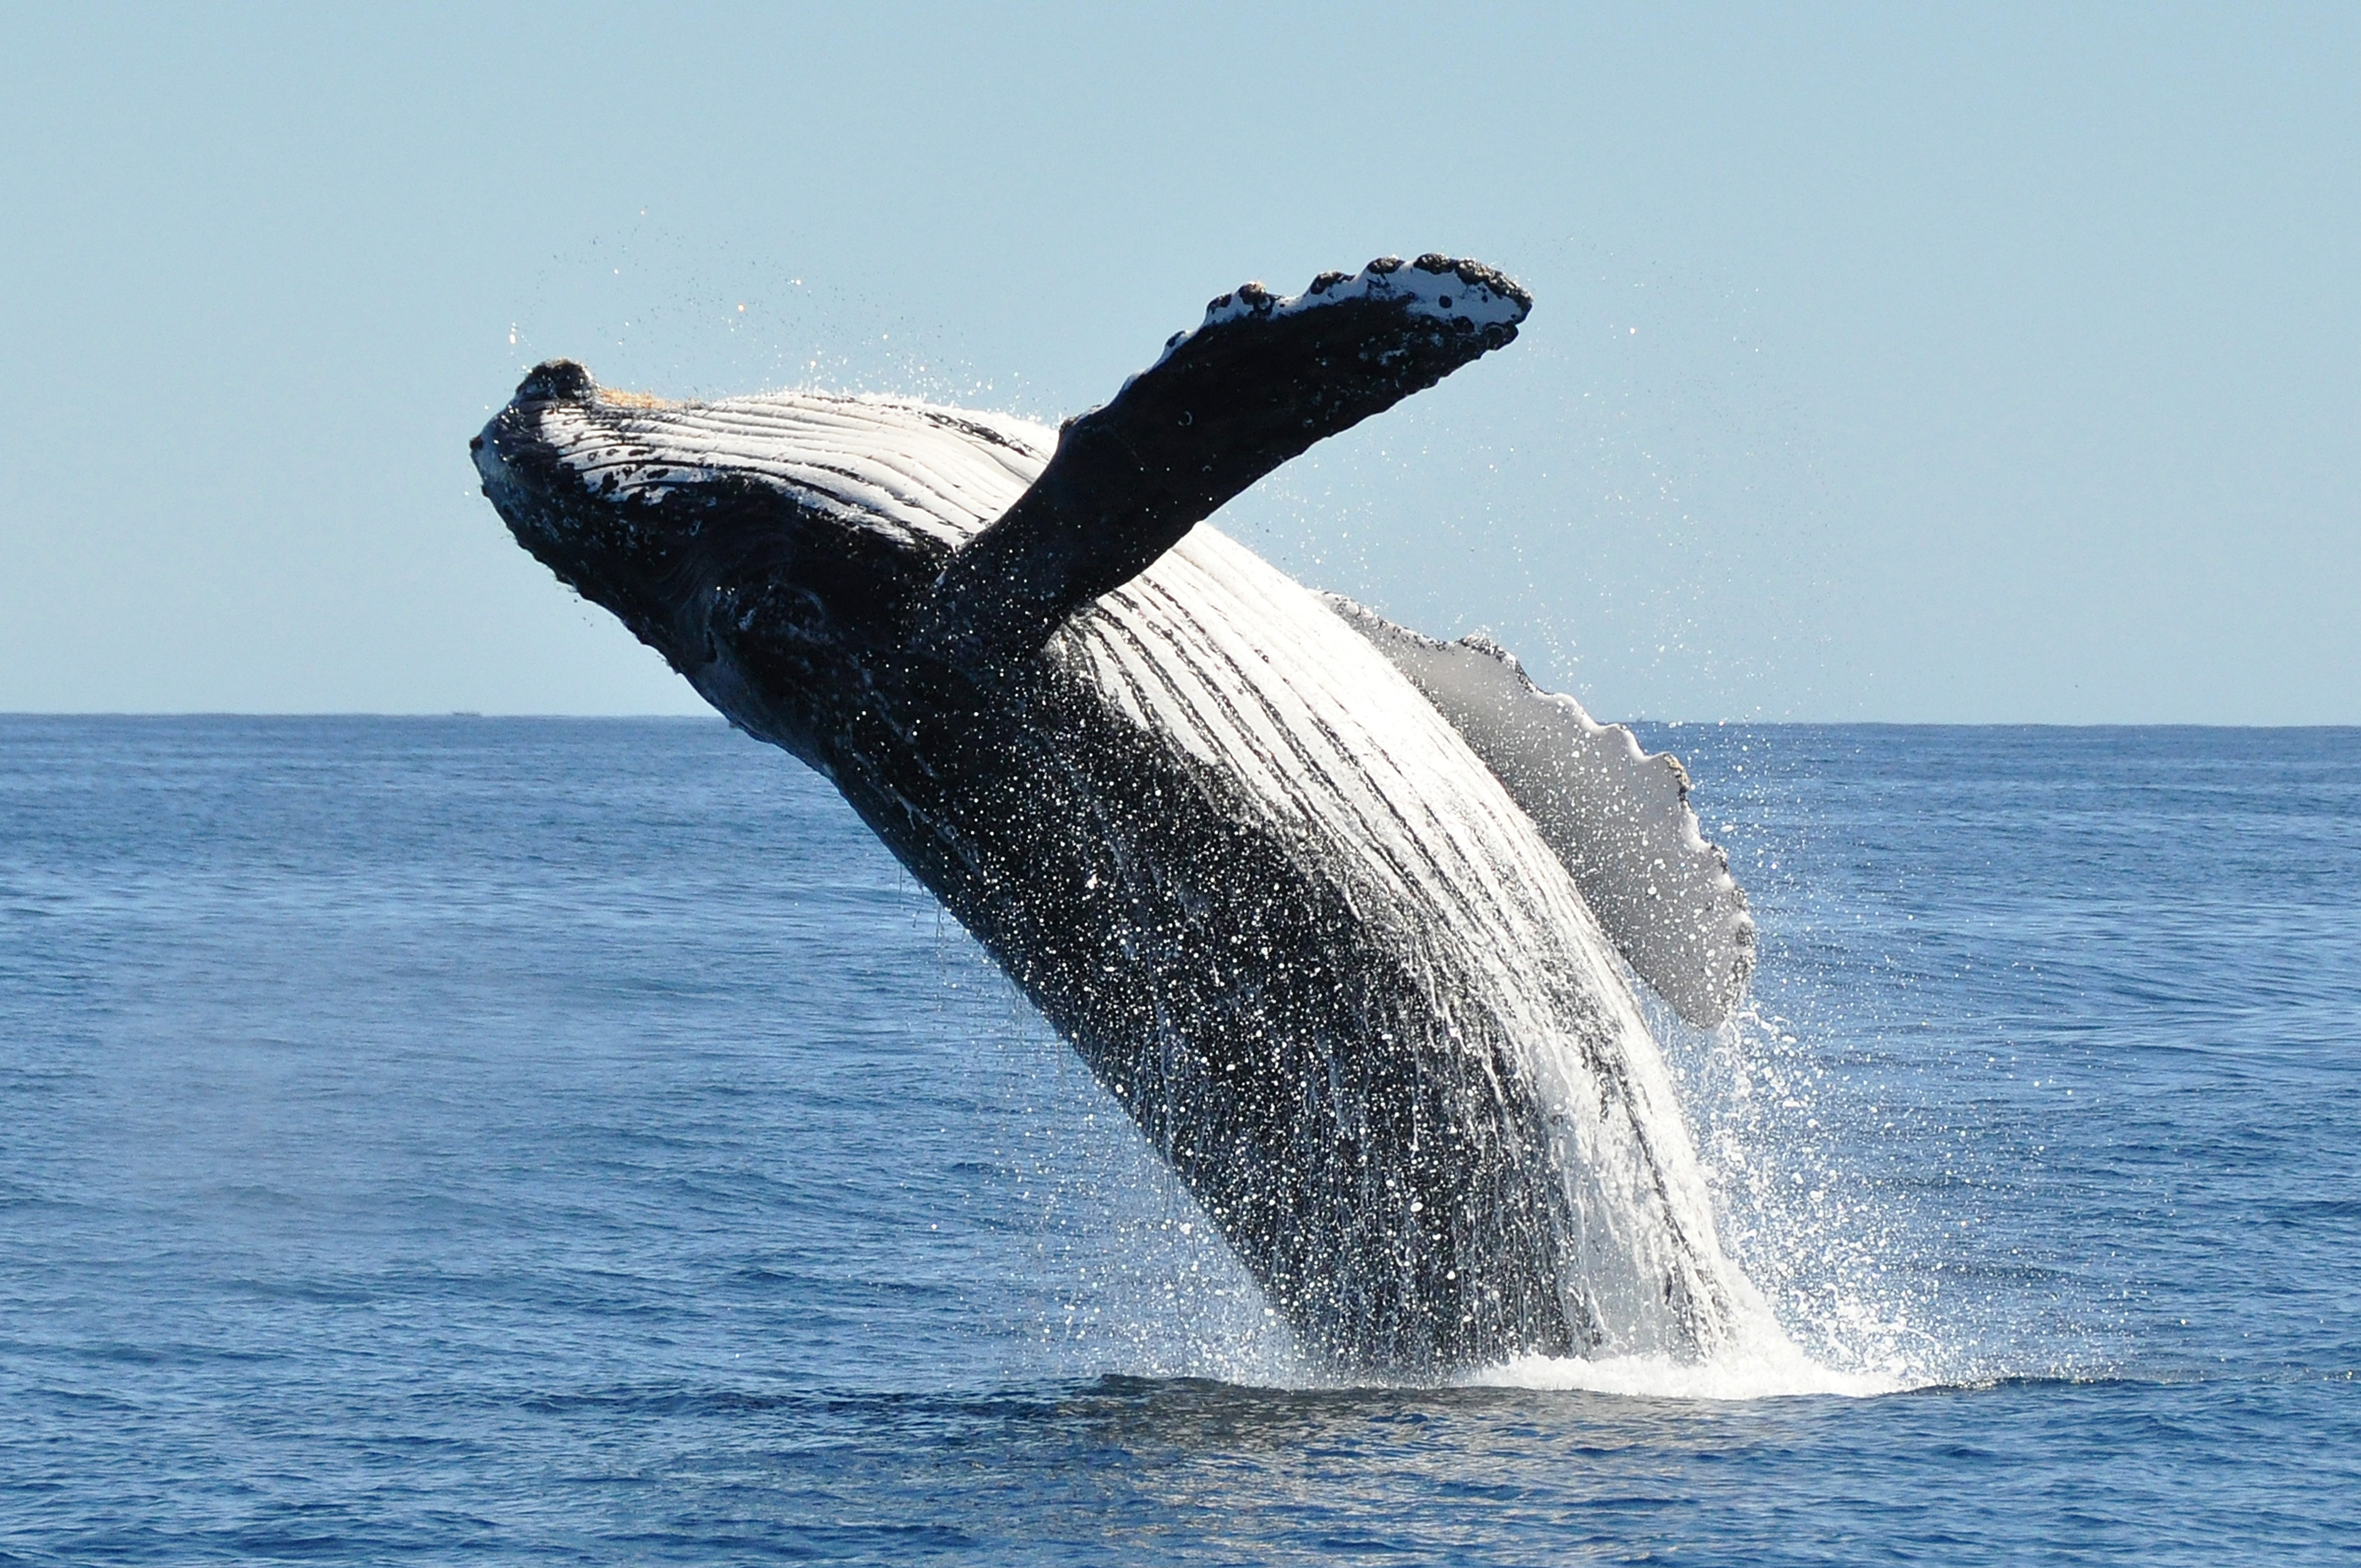 A humpback whale breaches off the coast of Baja California. Image by Tim Melling / Moment / Getty